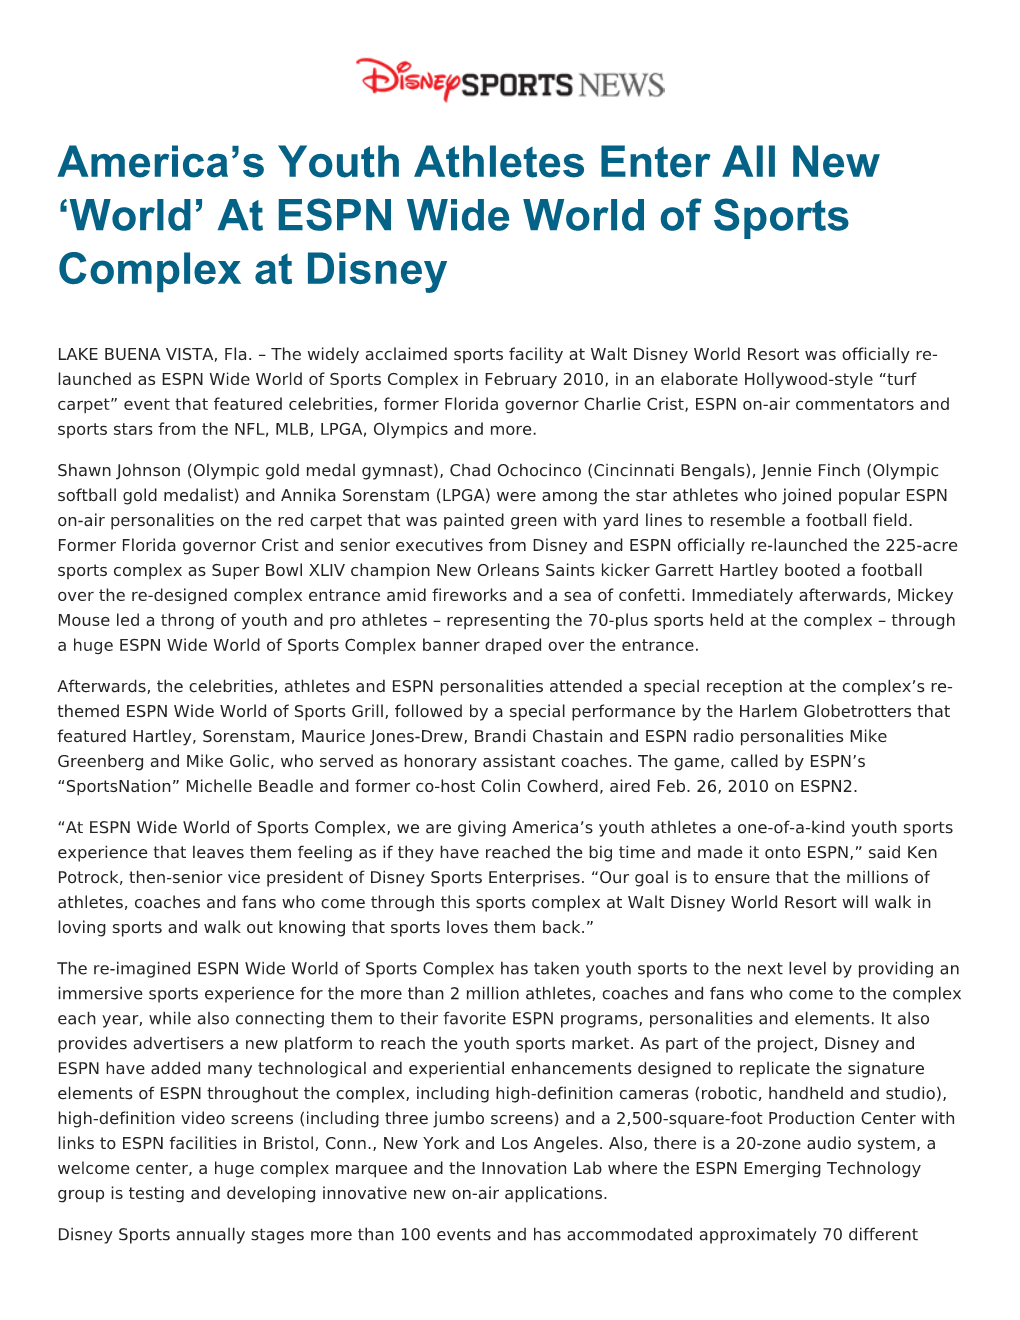 America's Youth Athletes Enter All New 'World' at ESPN Wide World